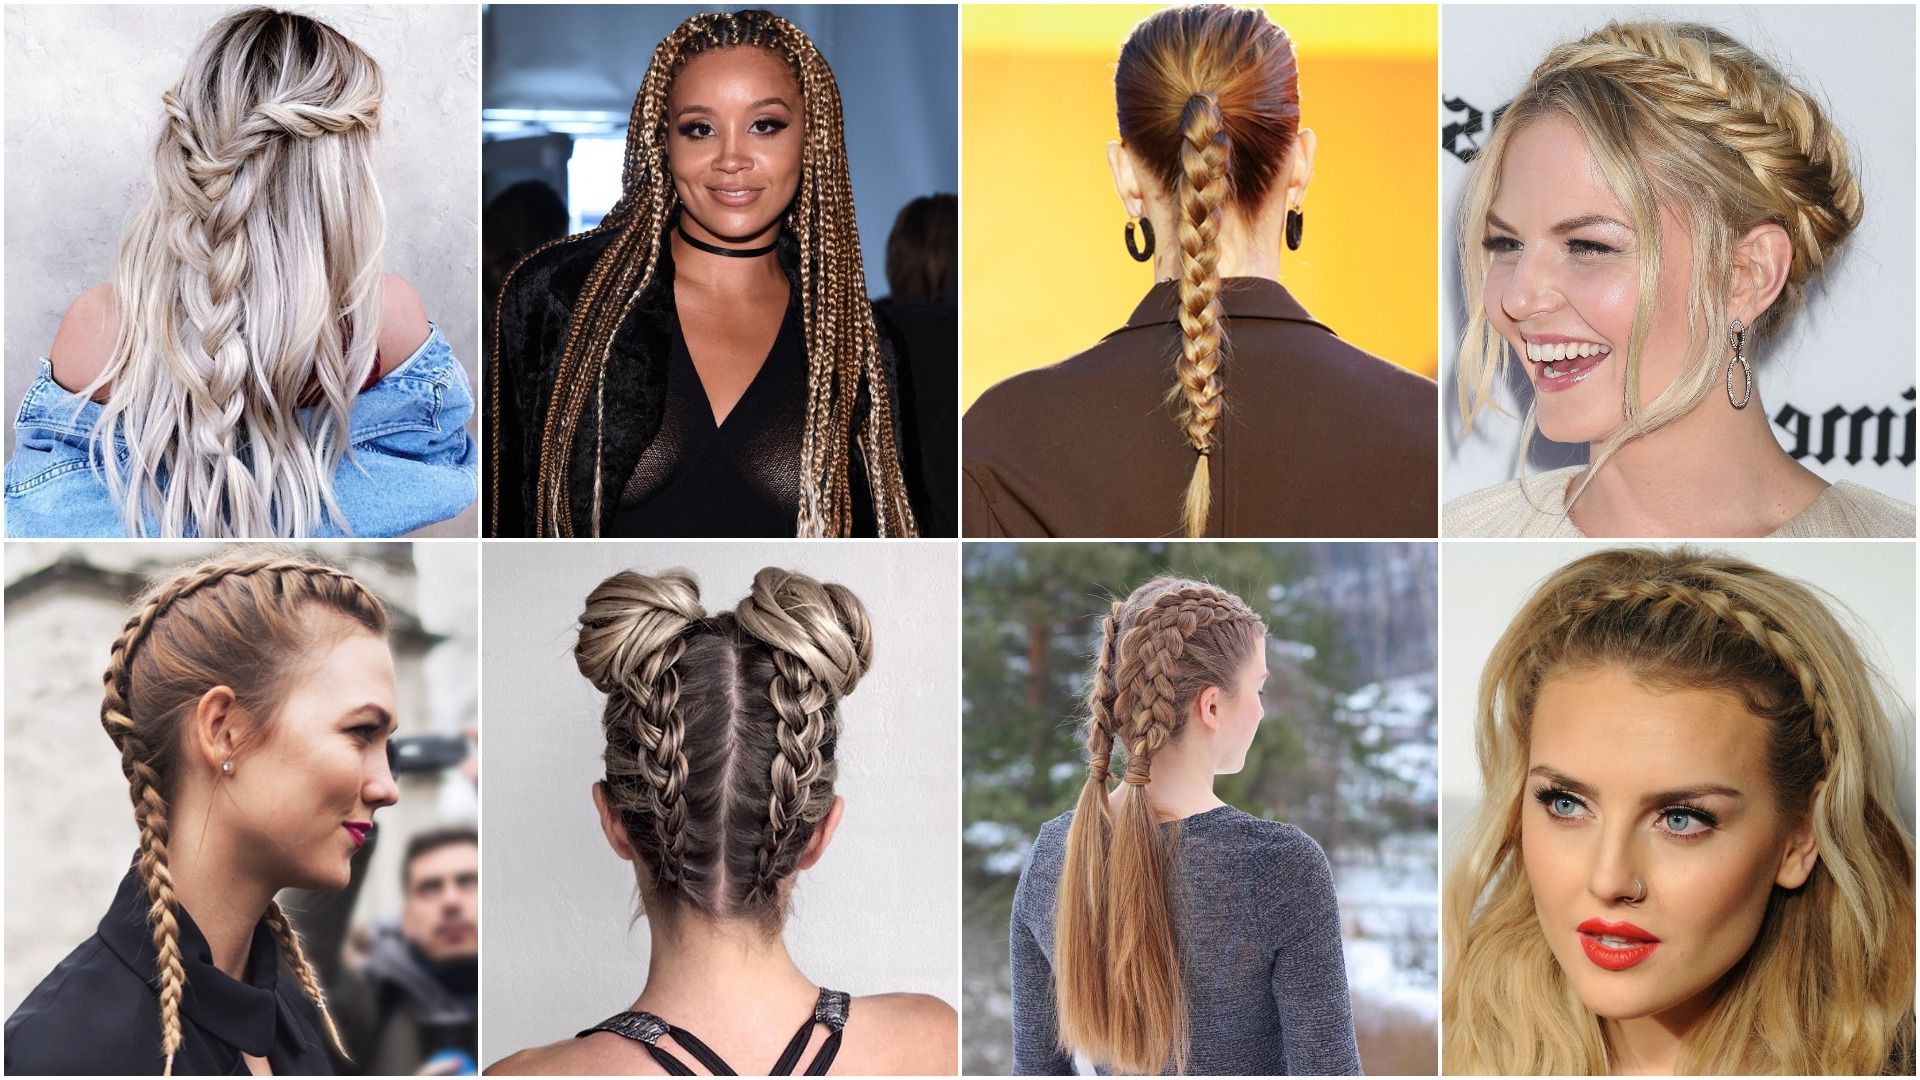 40 Different Styles To Make Braid Hairstyles For Women Intended For Current Nostalgic Knotted Mermaid Braid Hairstyles (View 19 of 20)